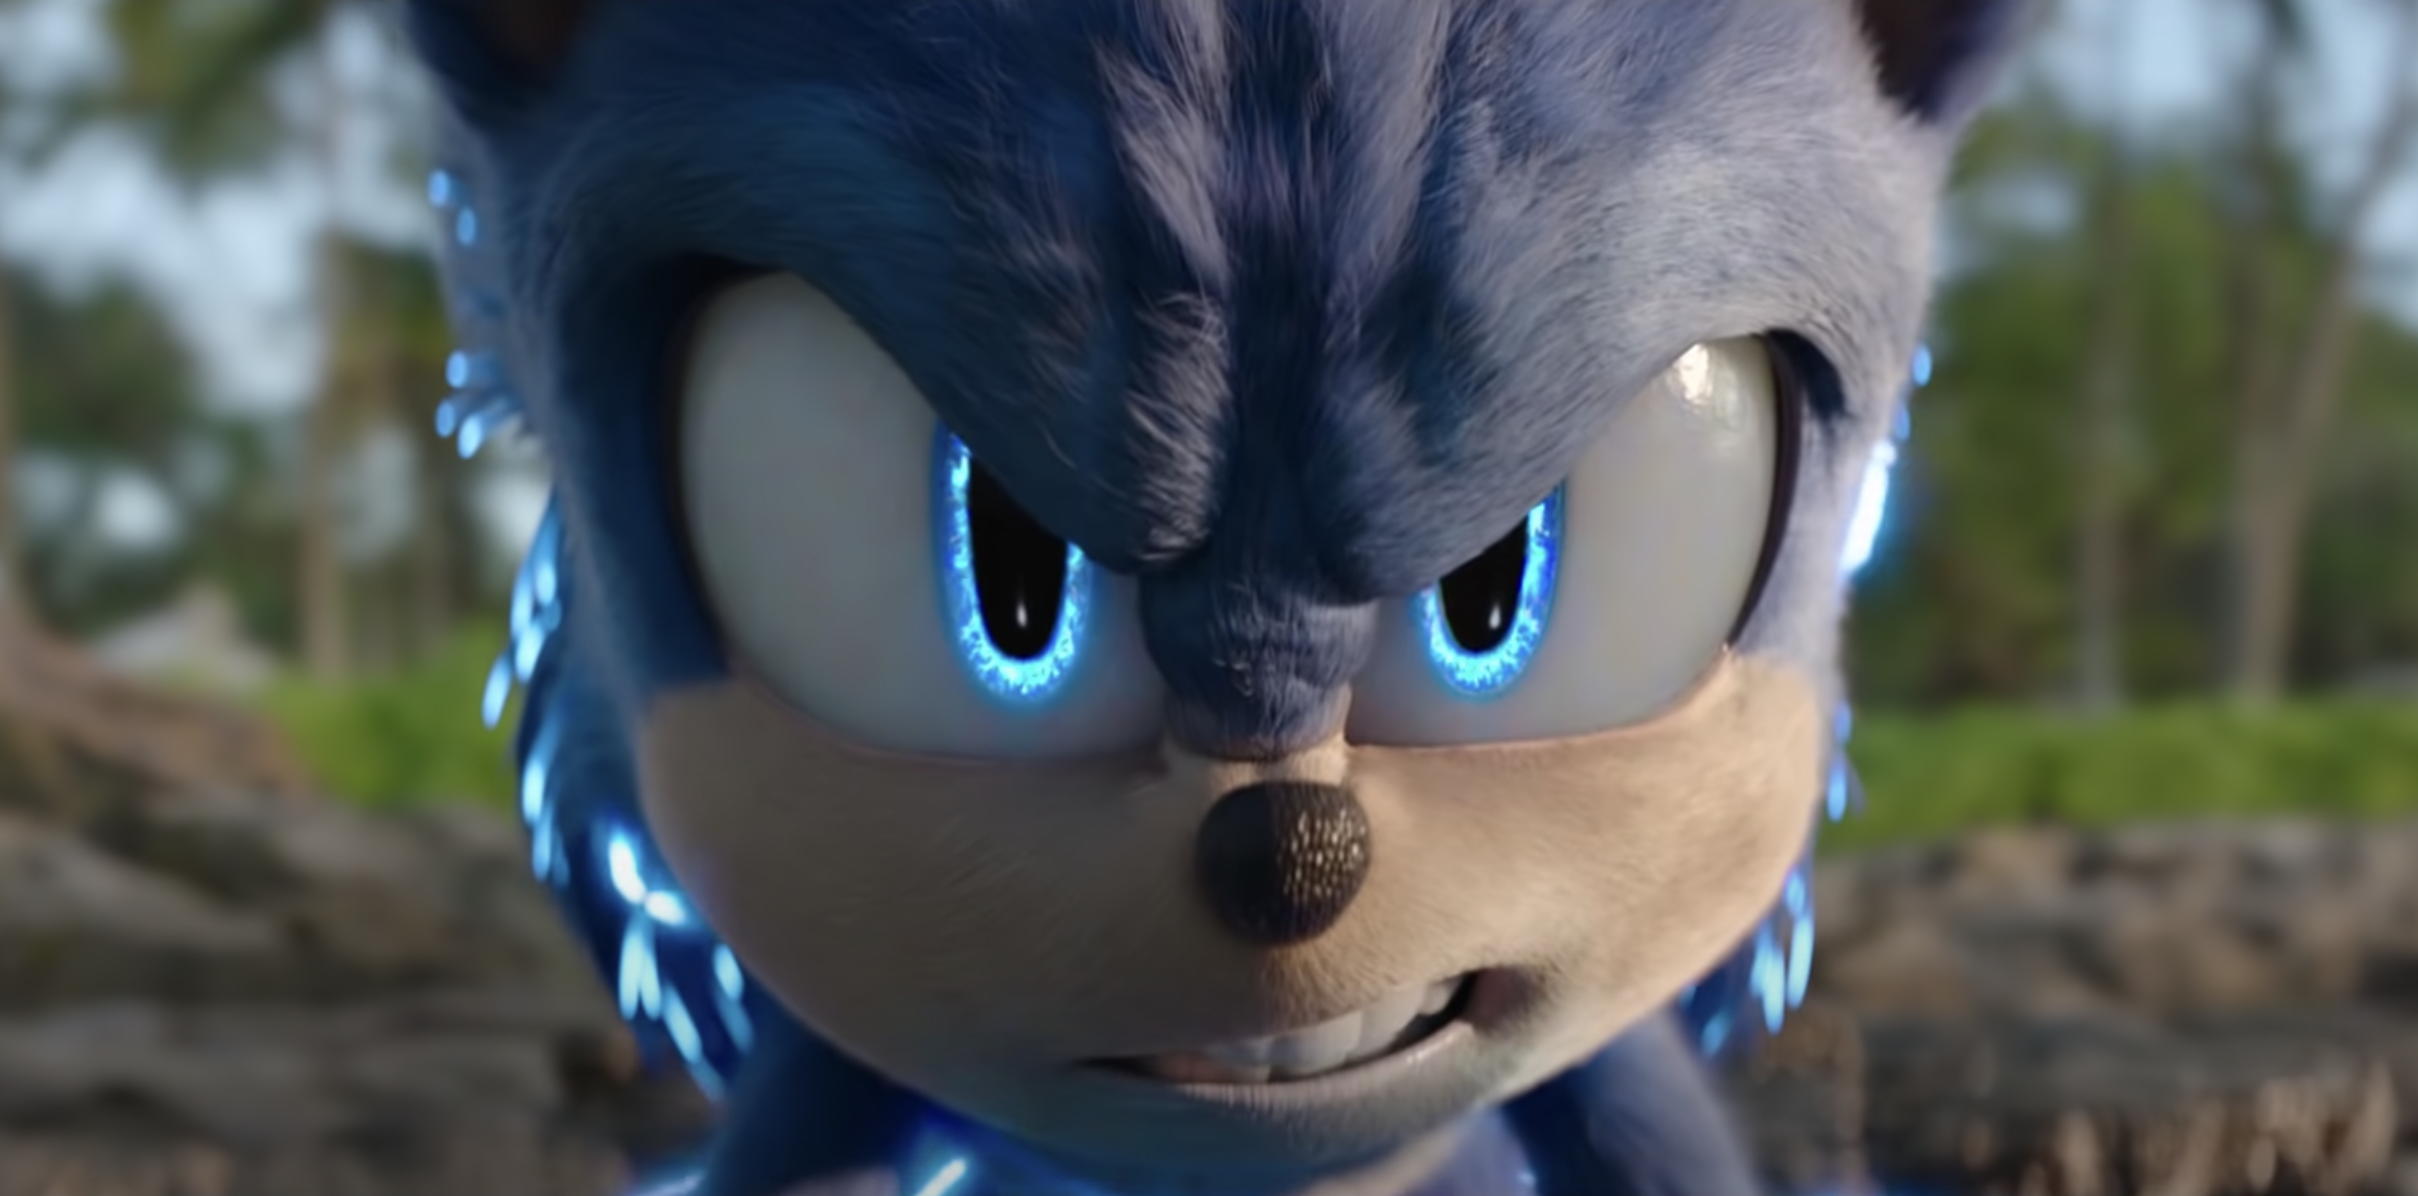 Sonic 2 Breaks Box Office Record With $67 Million Start